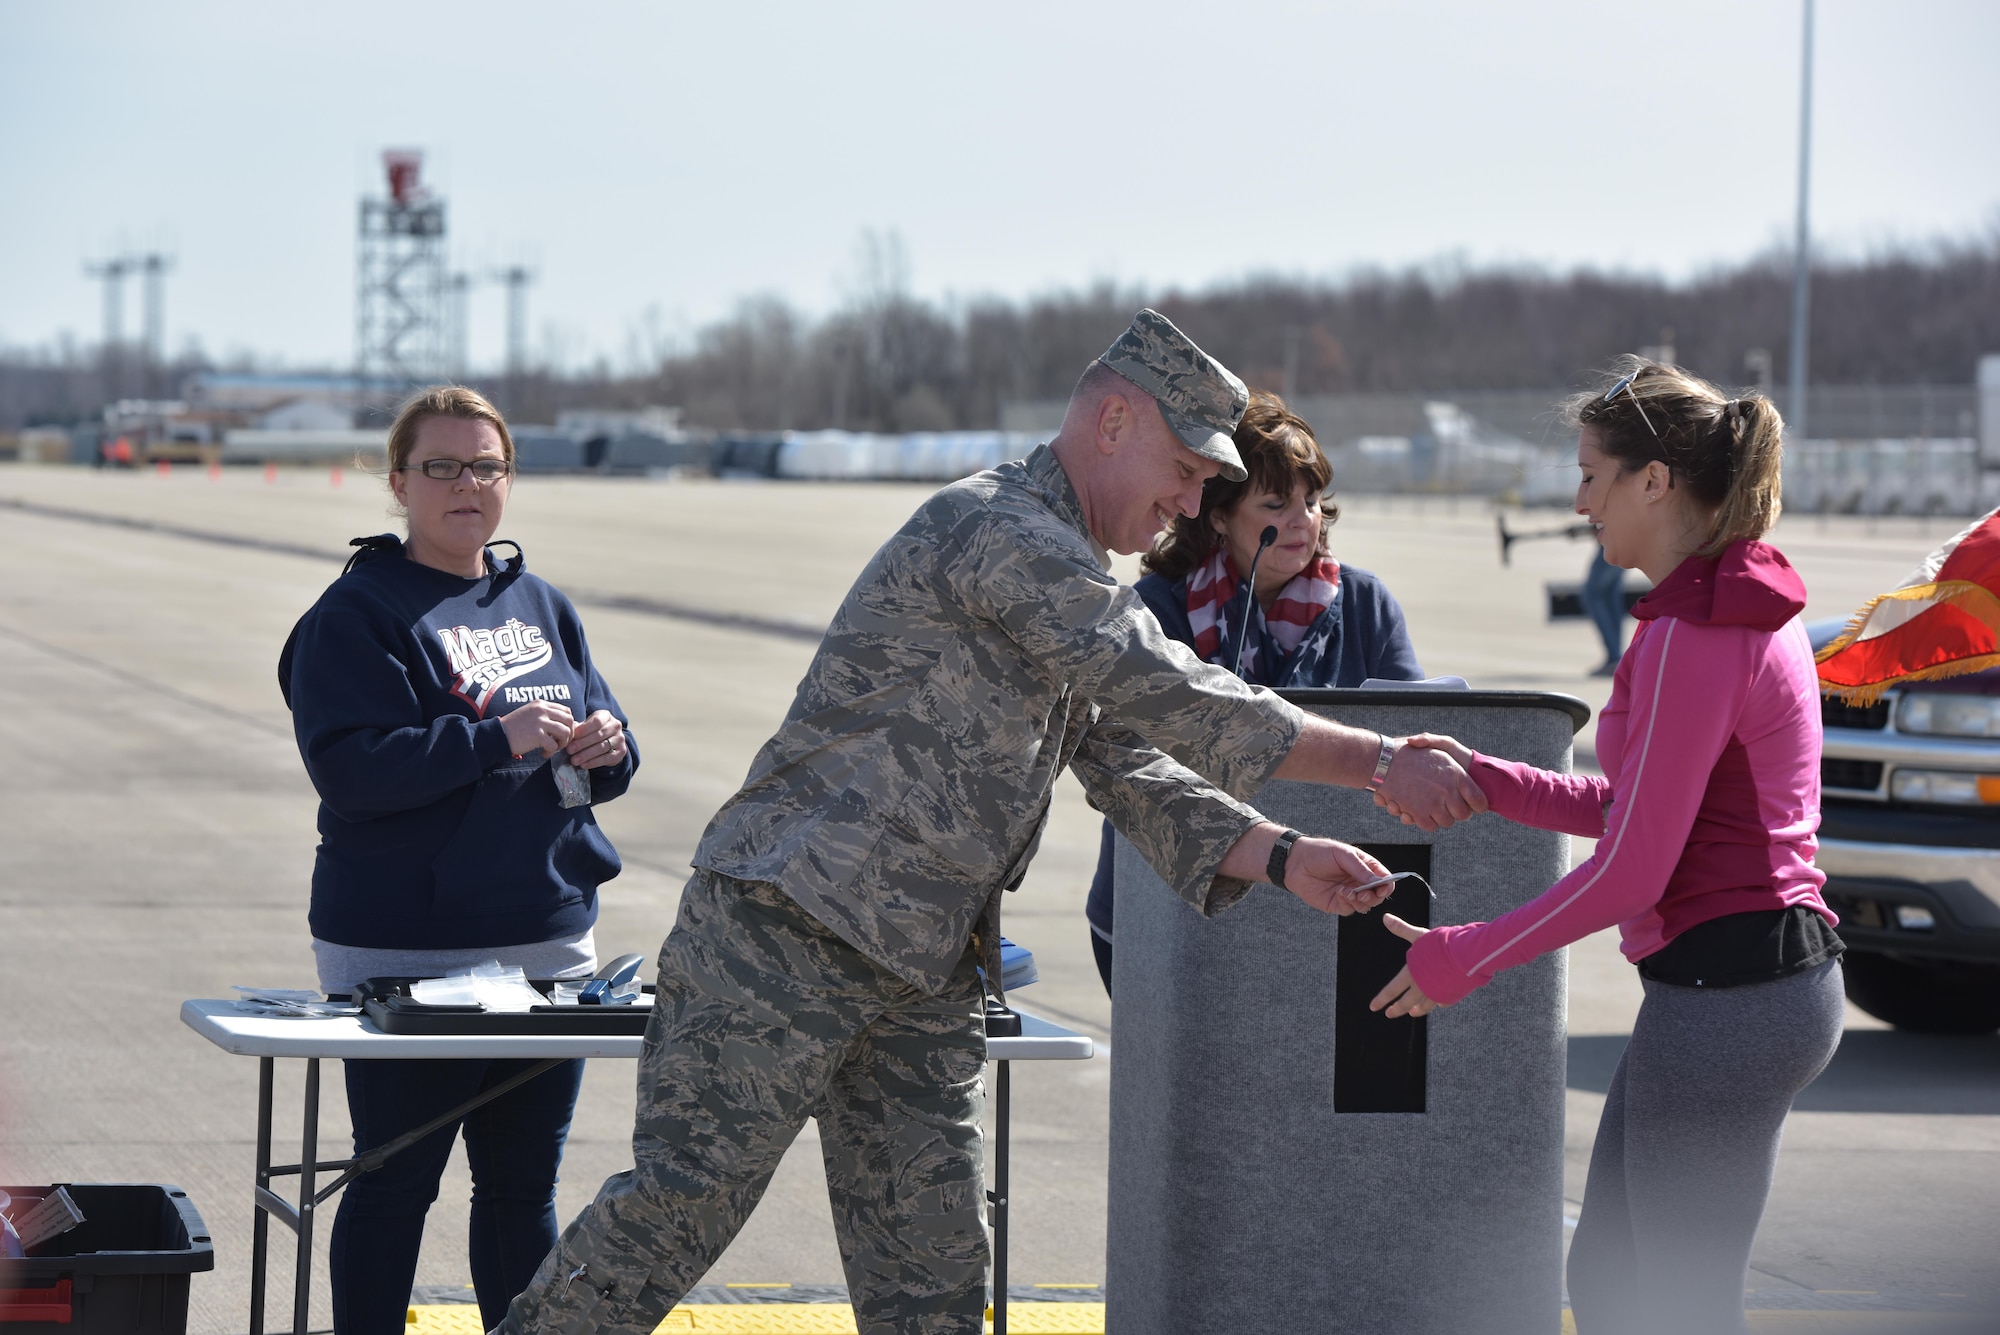 Col. Kevin Doyle, Commander of the Ohio Air National Guard’s 180th Fighter Wing, presents a runner with an award for winning her age group in the I Believe I Can Fly 5K at the Toledo Express Airport April 9, 2017 in Swanton, Ohio. The 180FW participates in community events to give back and maintain a strong relationship with the Ohio community. The race, now in its third year, provides runners of all ages, the rare opportunity to run a unique course, down the taxiways used by Northwest Ohio’s very own 180FW, while also promoting awareness and raising funds to benefit our veterans who have given so much to our great nation. (U.S. Air National Guard photo by Tech. Sgt. Nic Kuetemeyer)